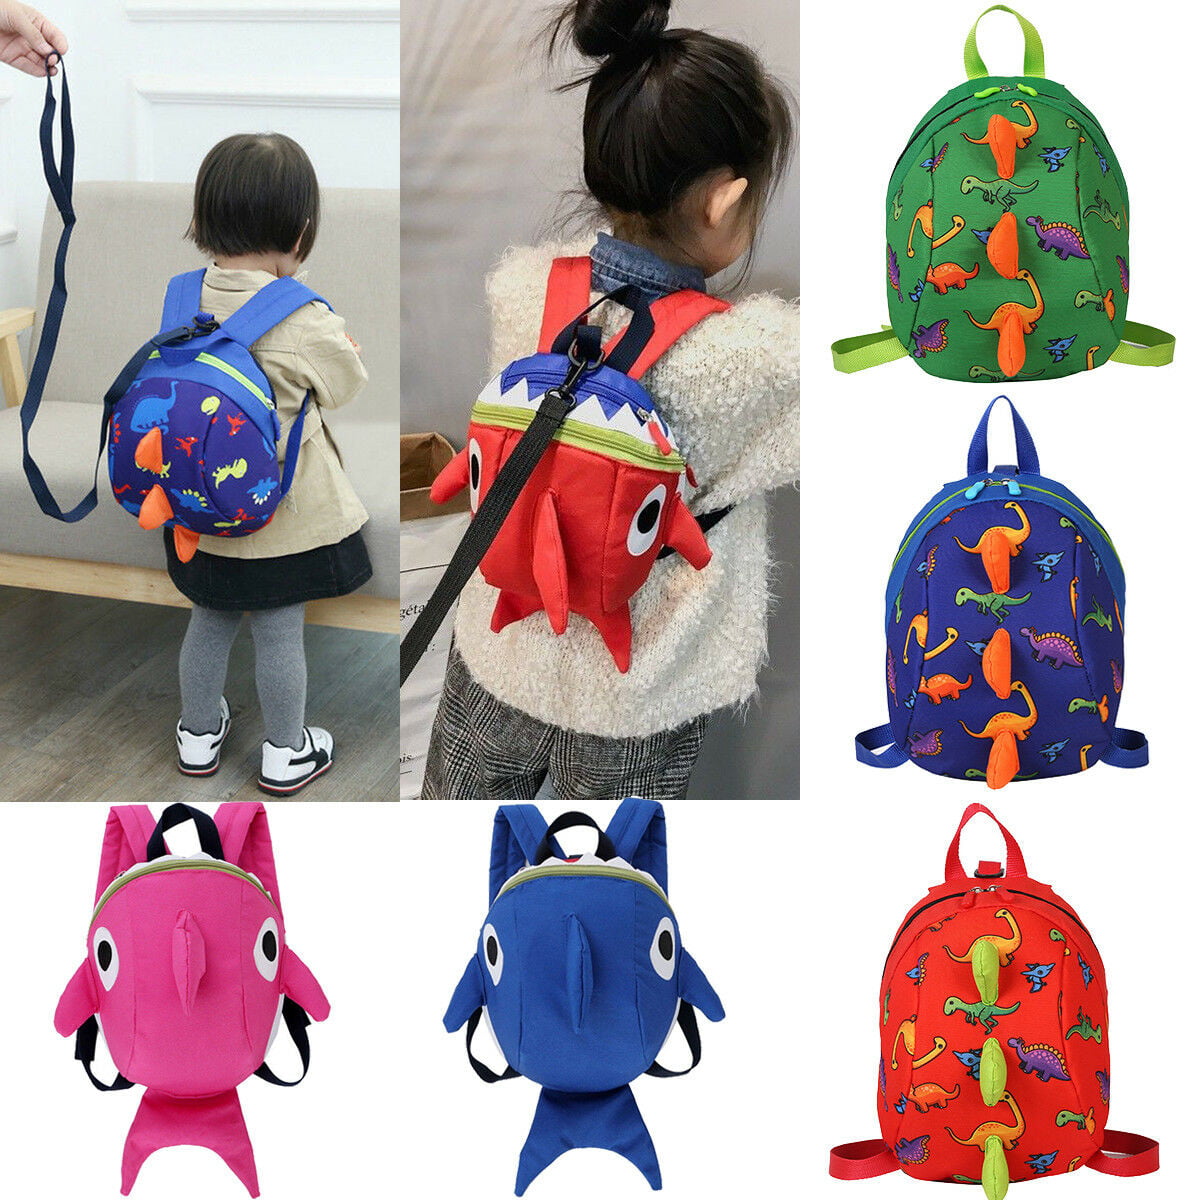 Kids Baby Safety Harness Backpack Leash Toddler Anti-lost Cartoon Animal Bag 